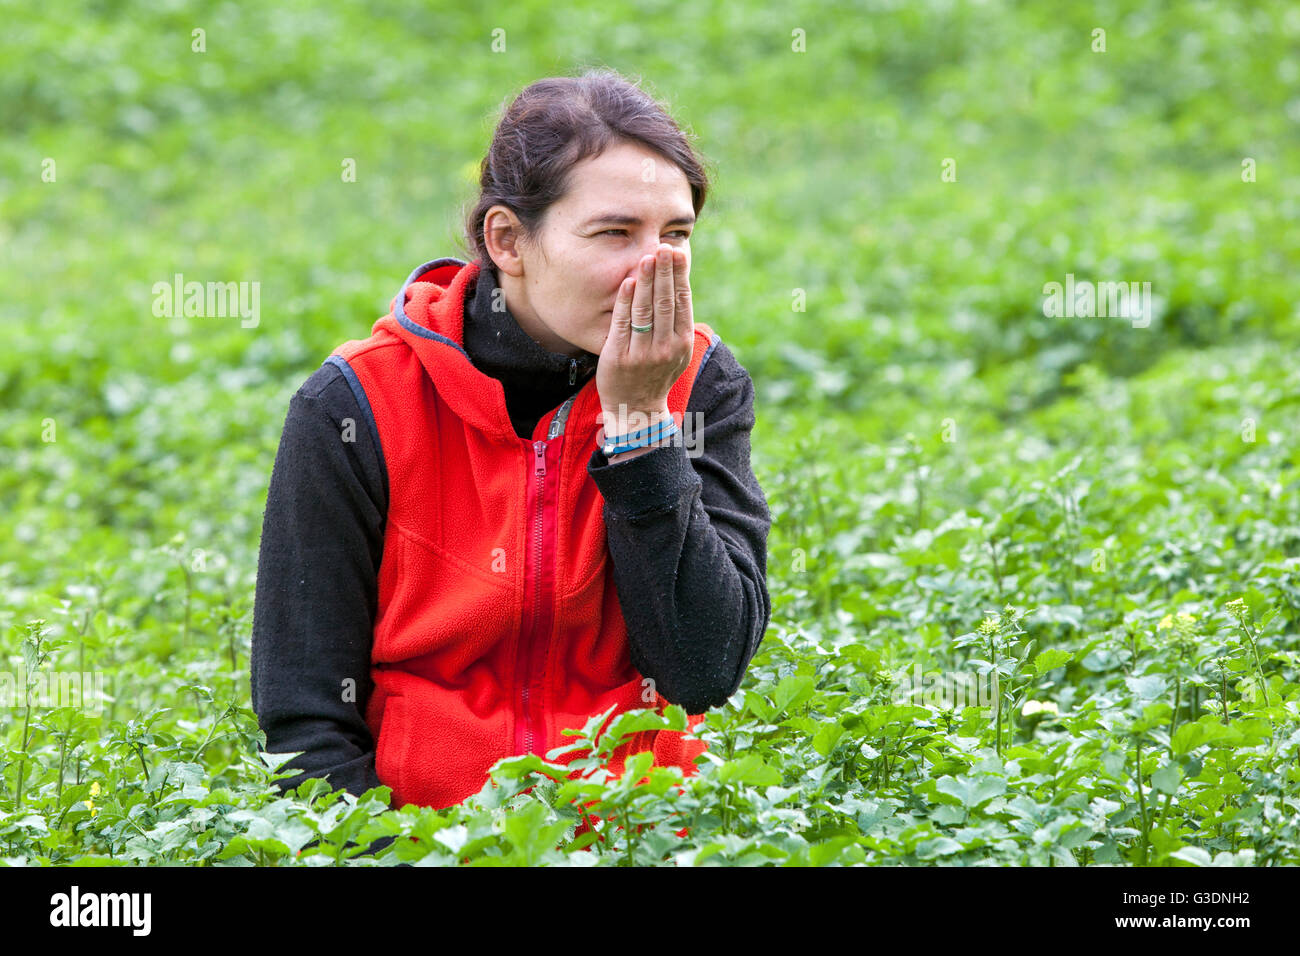 Woman in the herbs garden herb of aromatic plants lady smelling plants woman herb garden Stock Photo